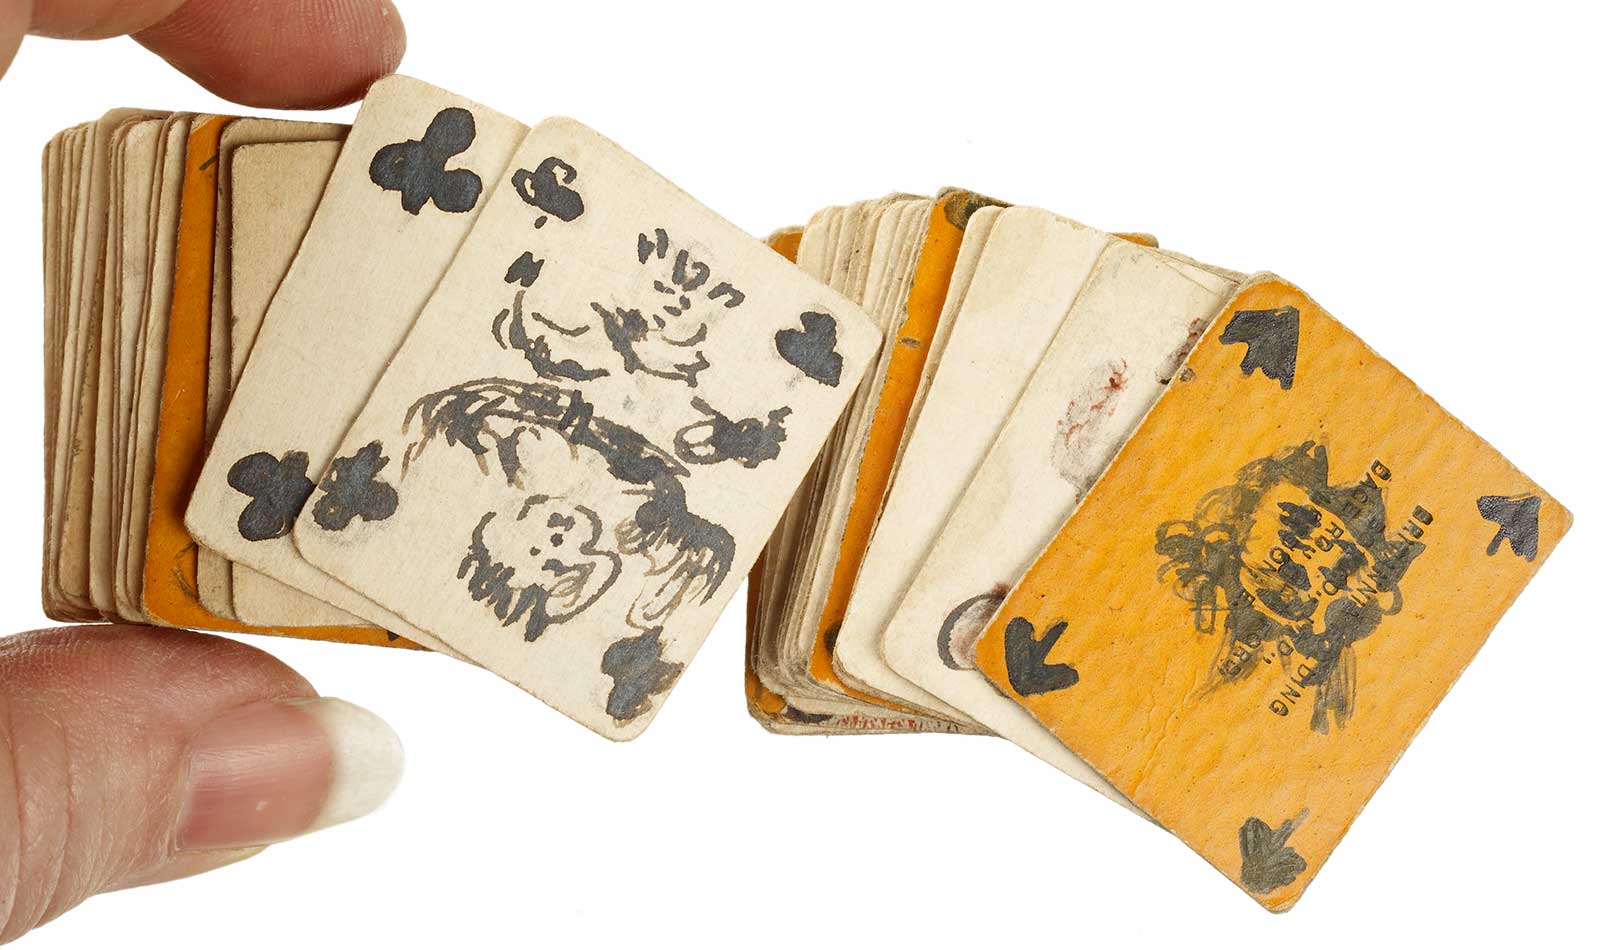 ​Playing cards made by the suffragette Kitty Marshall held between fingers - hero image